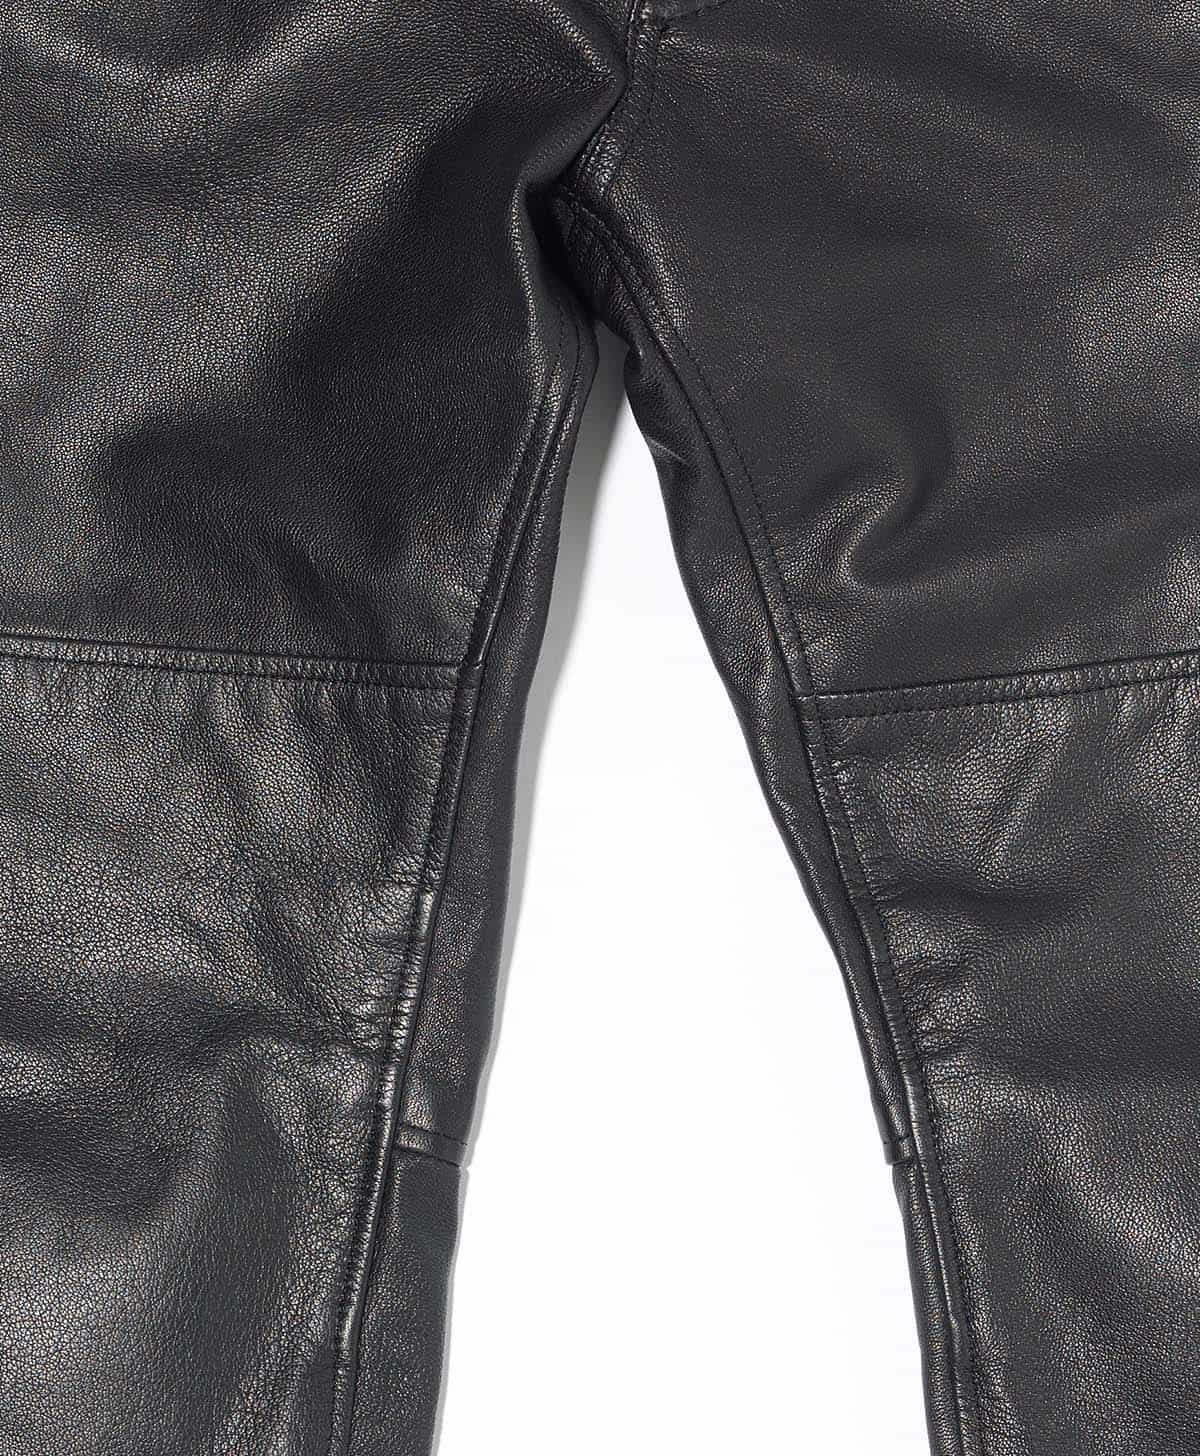 Buy Soft Black Nappa Leather Pants Online in India - Etsy